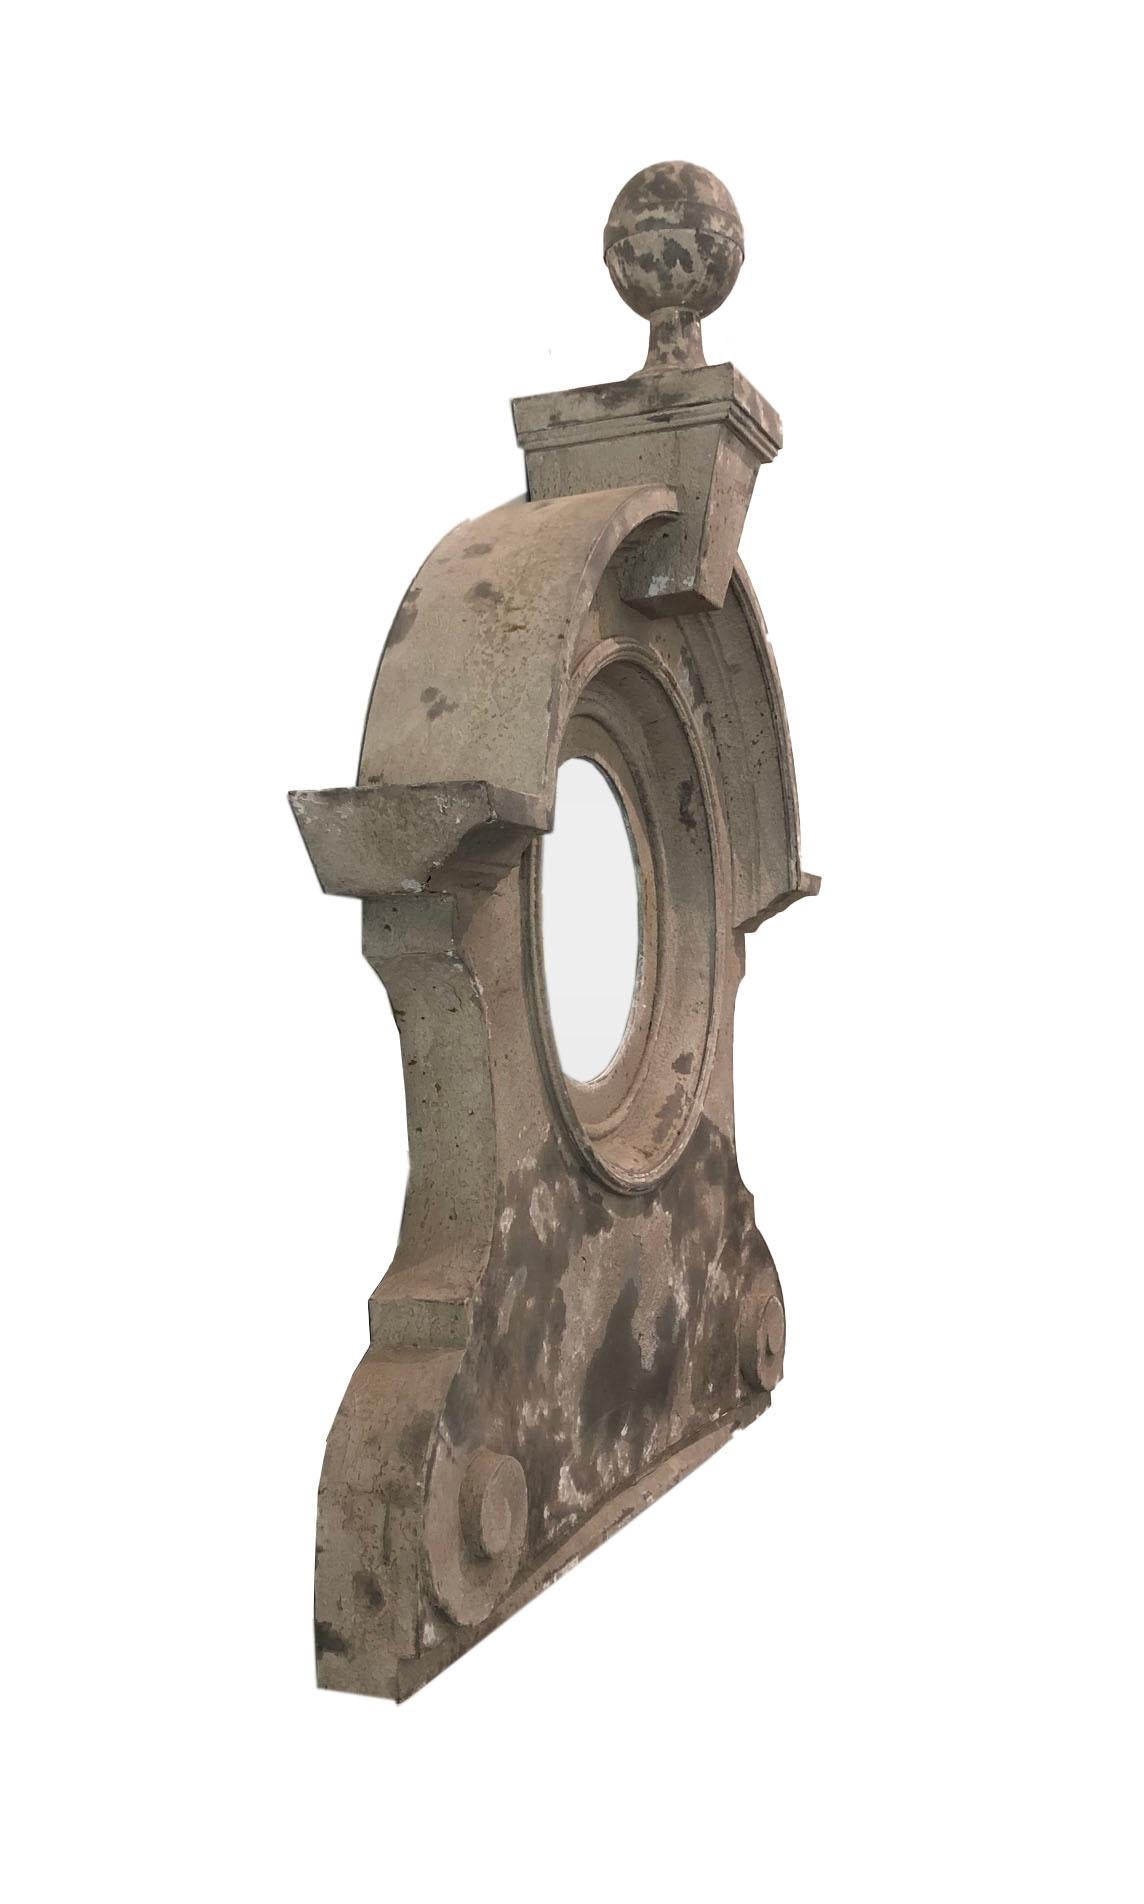 Beautiful and large mansard window architectural element sometimes called and oeil de boeuf, with a mirror added. Large round zinc finial on top and beautiful aged patina. A simpler design than many other mansard windows of its time.